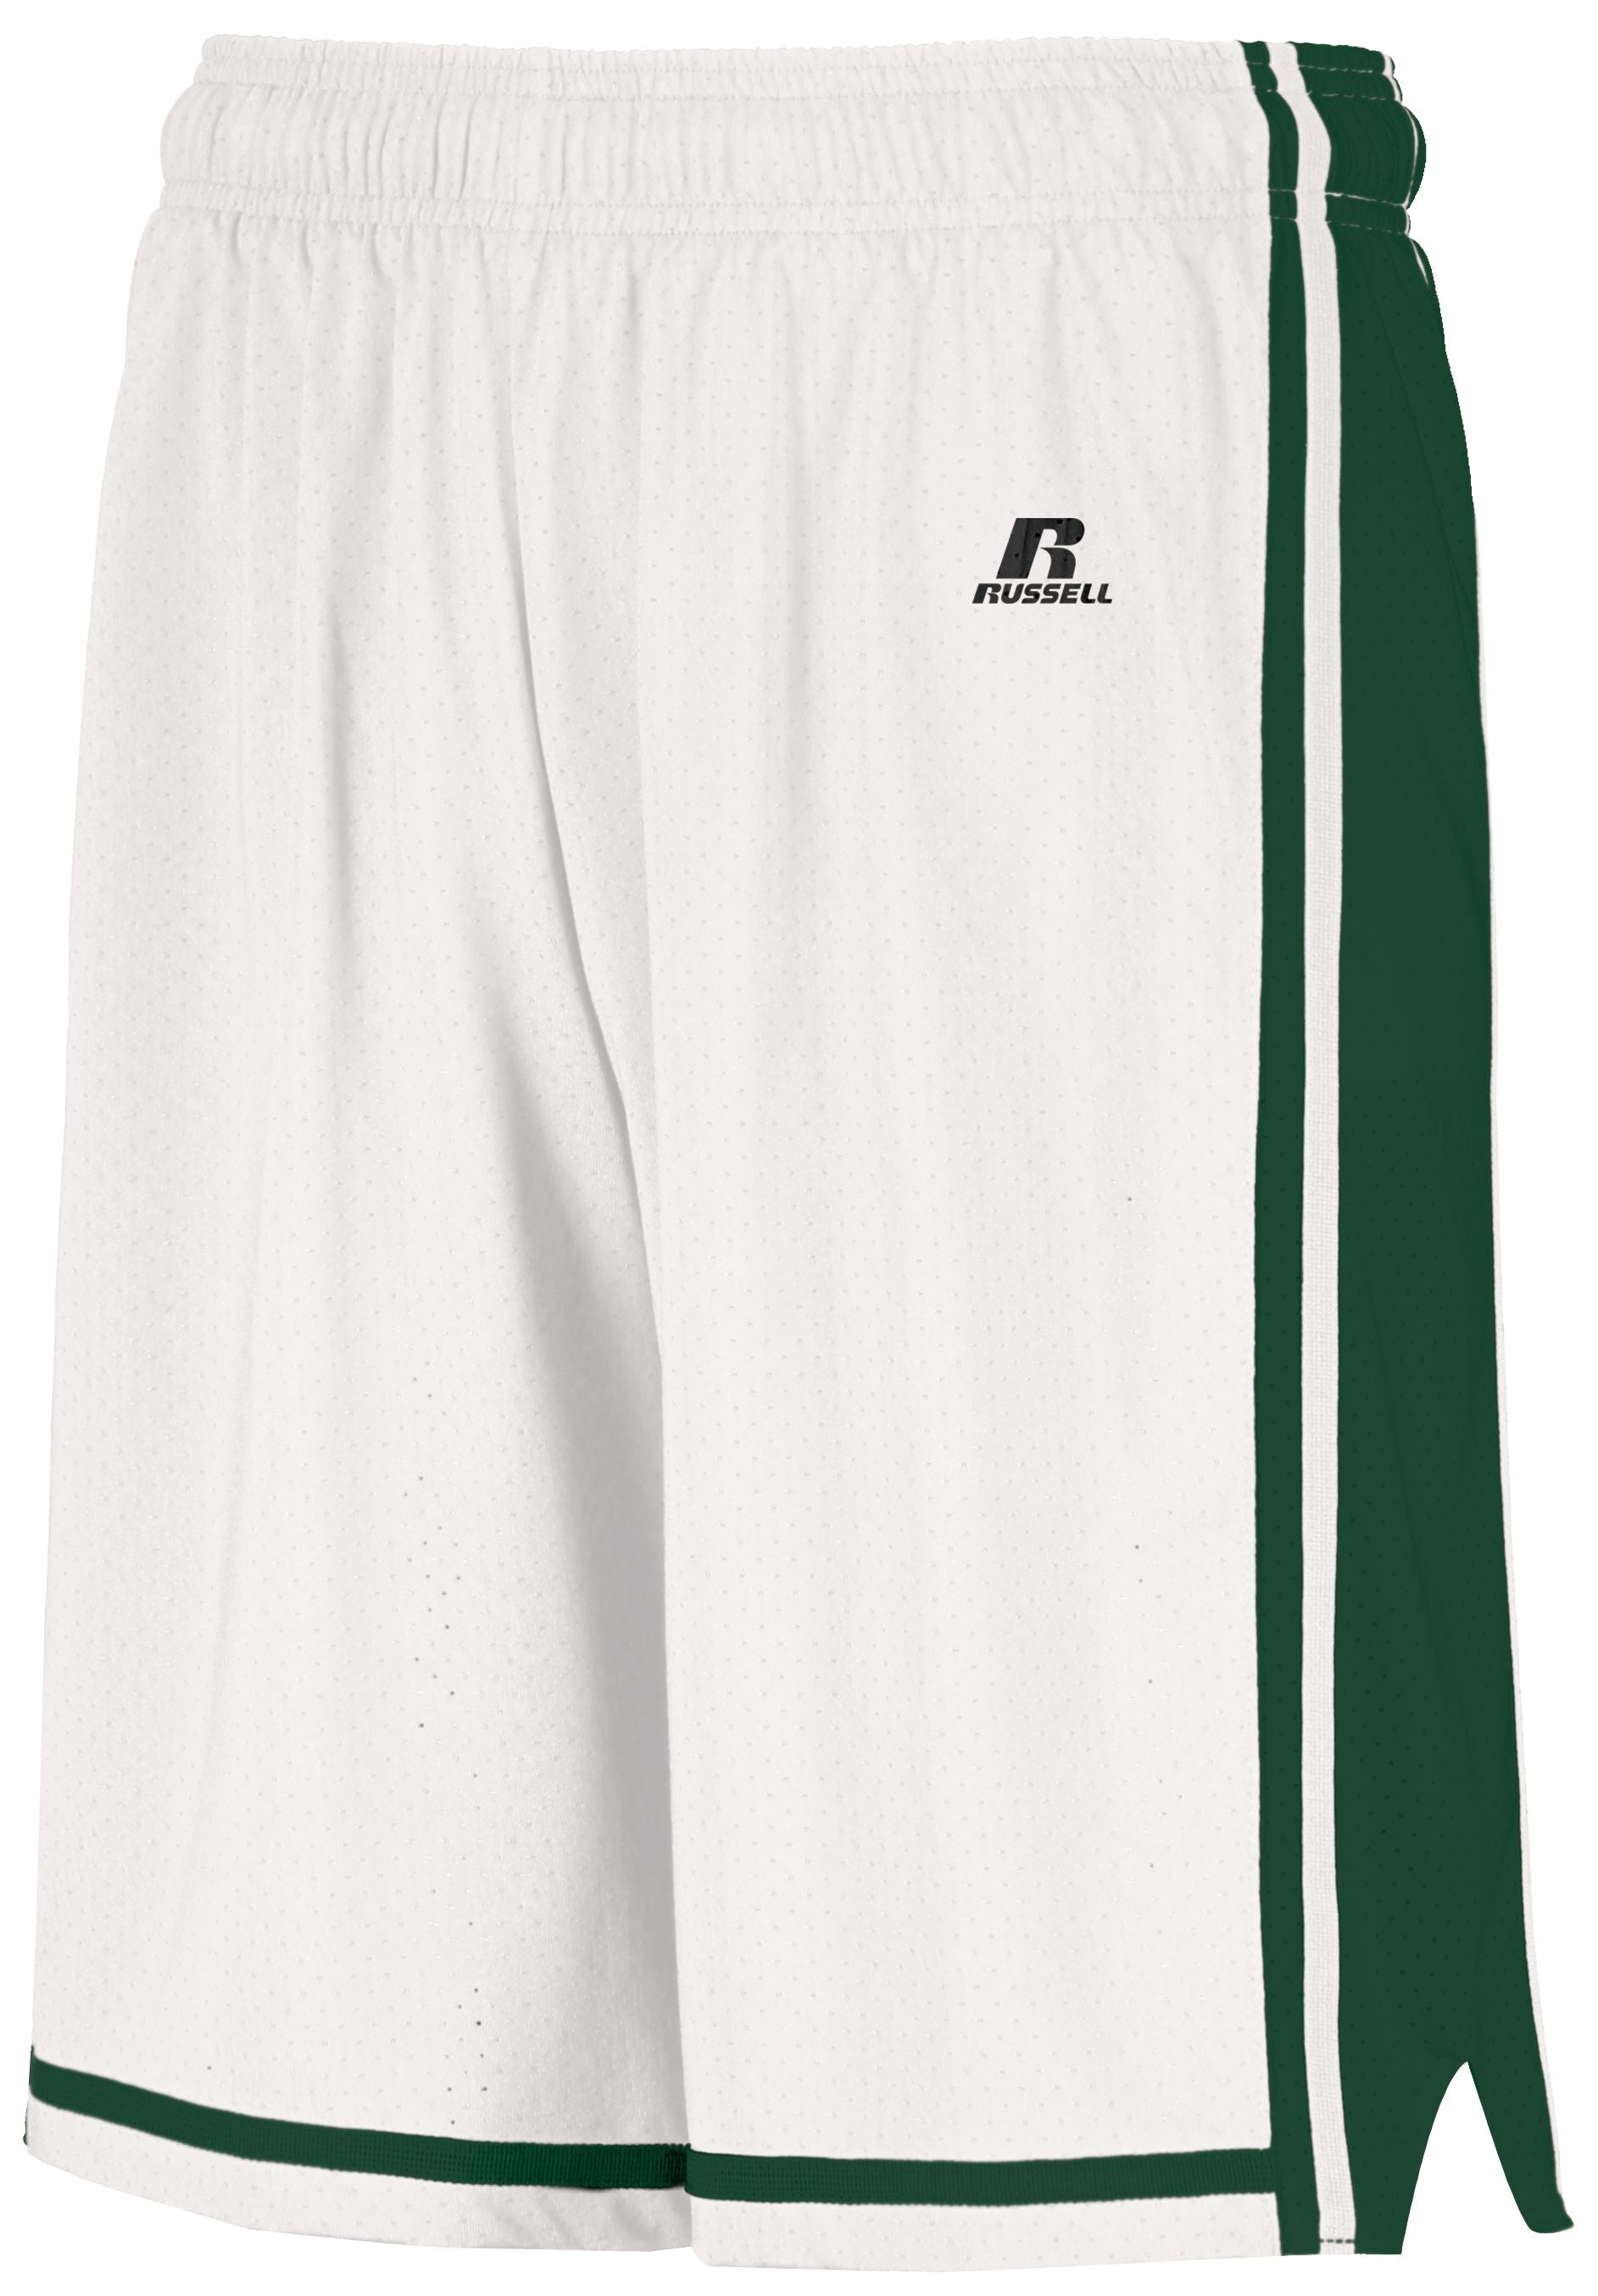 Russell Athletic Legacy Basketball Shorts in White/Dark Green  -Part of the Adult, Adult-Shorts, Basketball, Russell-Athletic-Products, All-Sports, All-Sports-1 product lines at KanaleyCreations.com